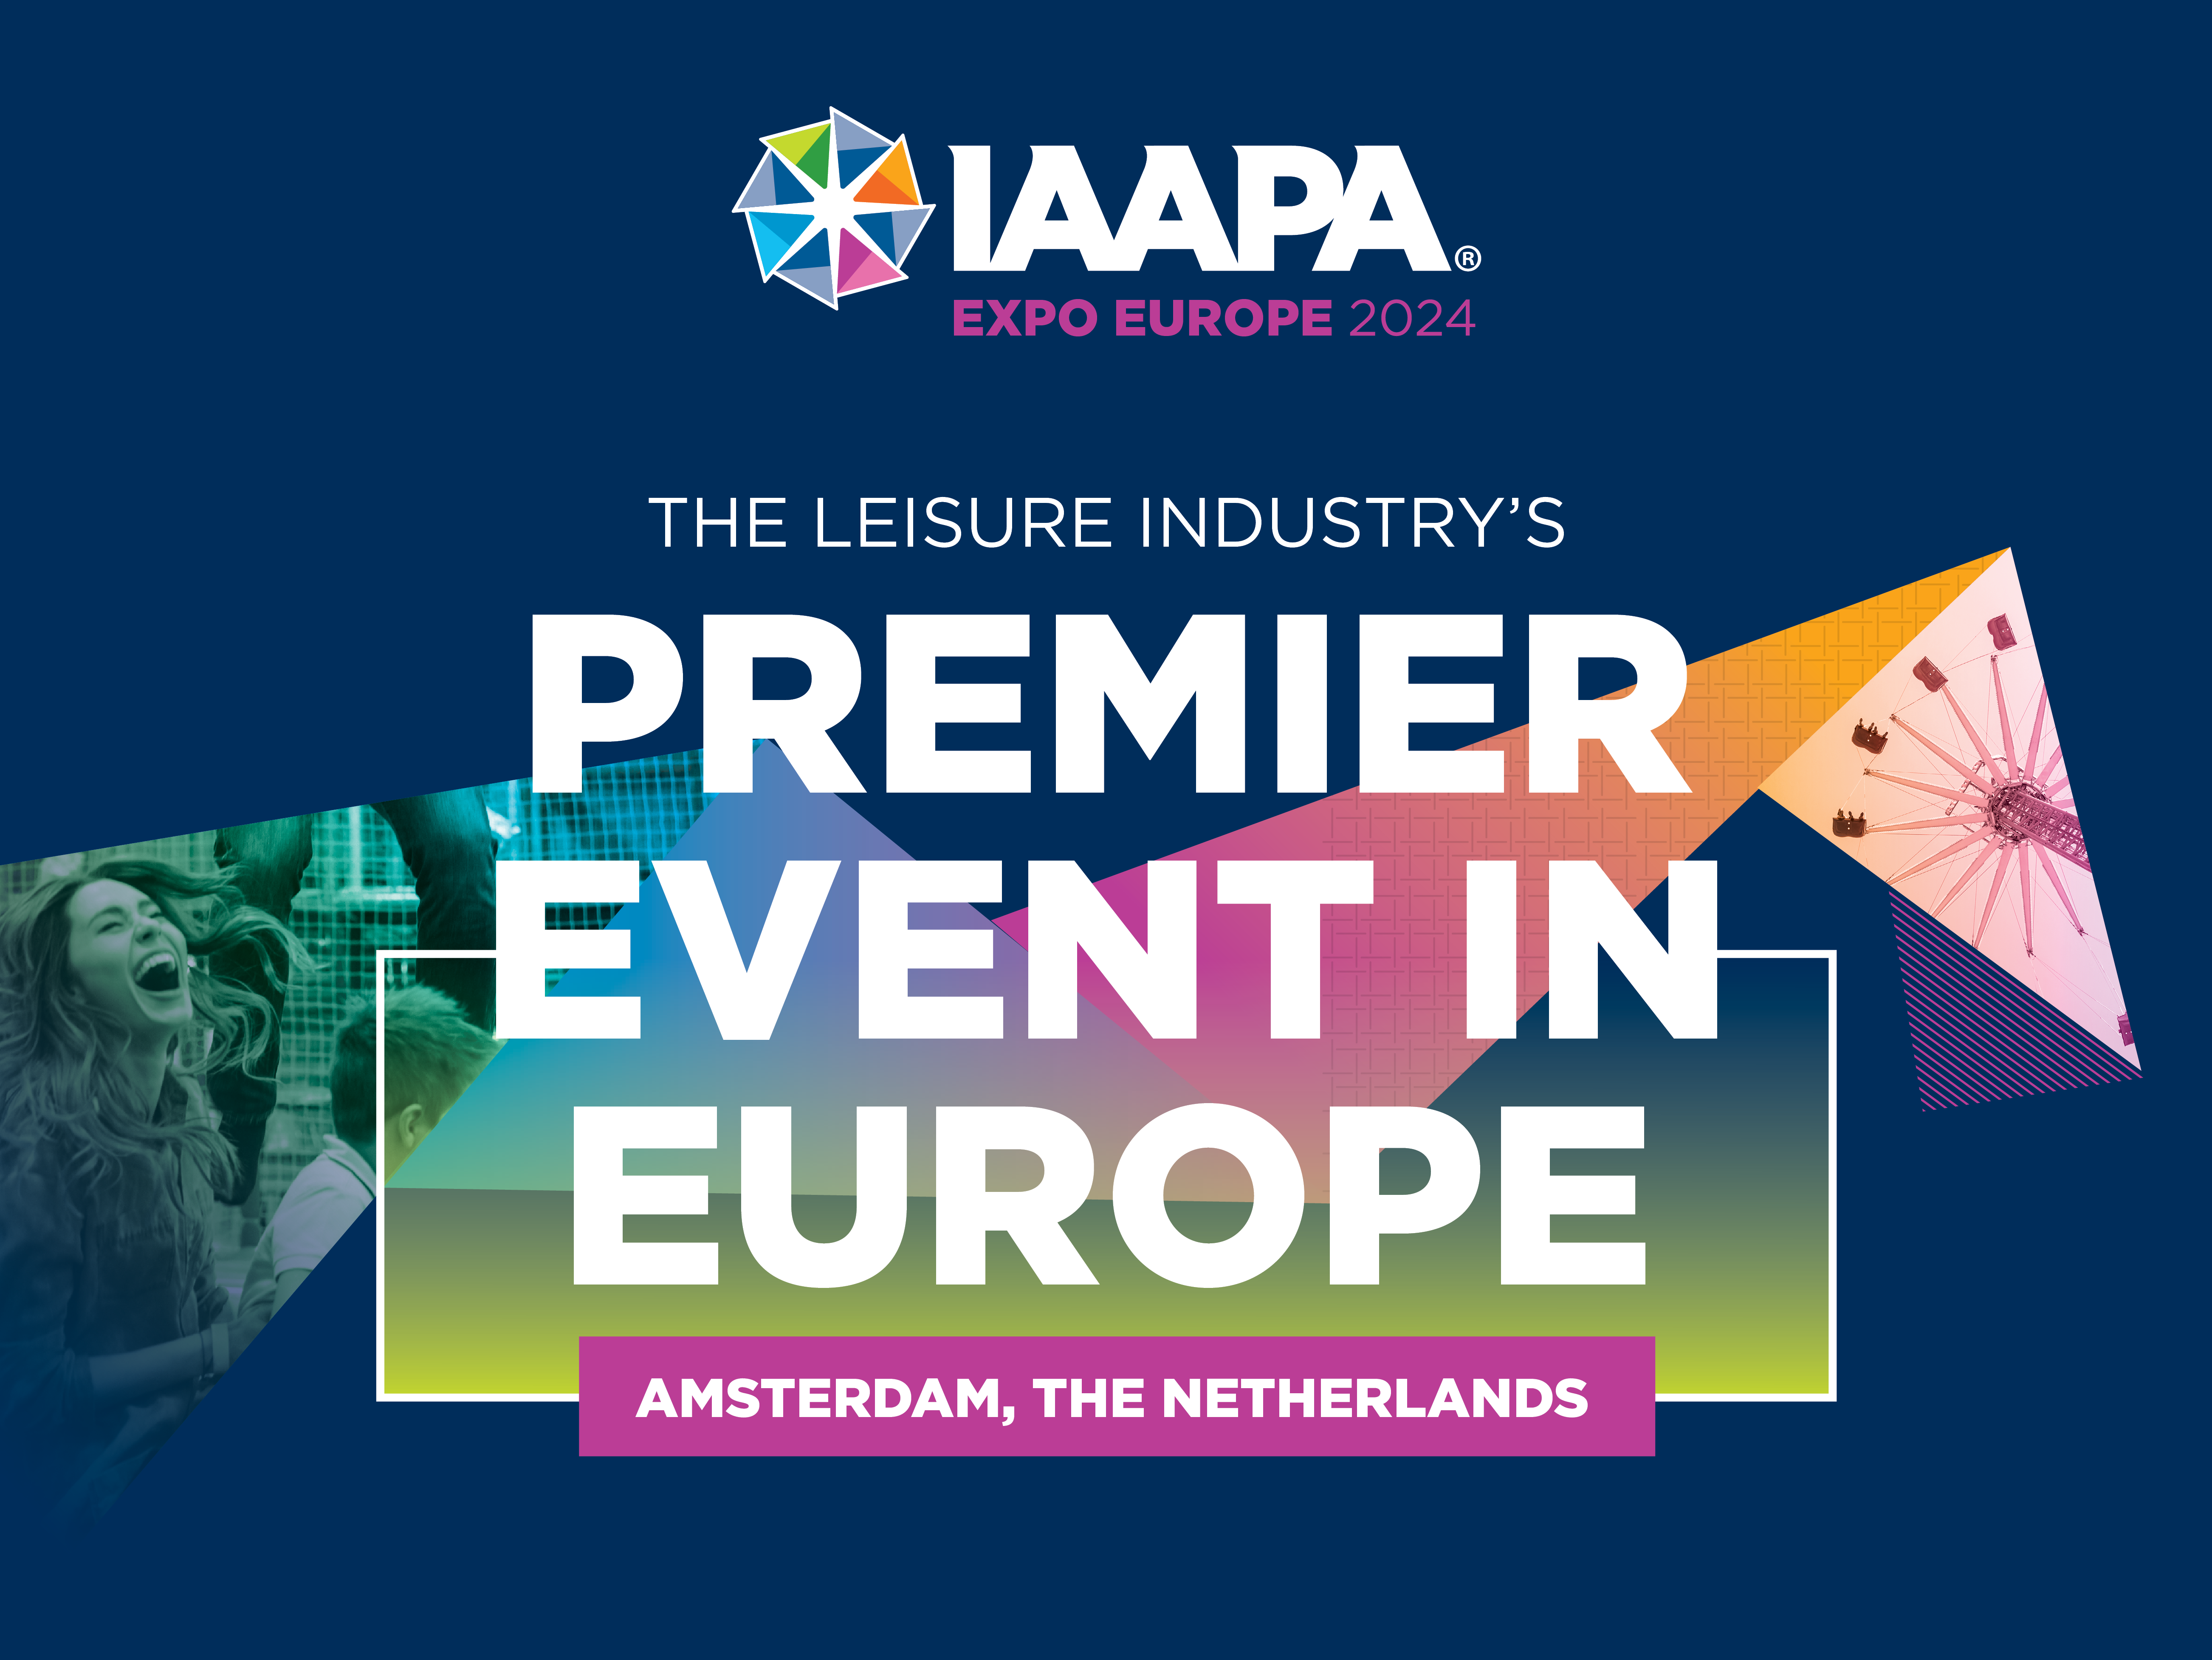 The Leisure Industry's Premier Event in Europe